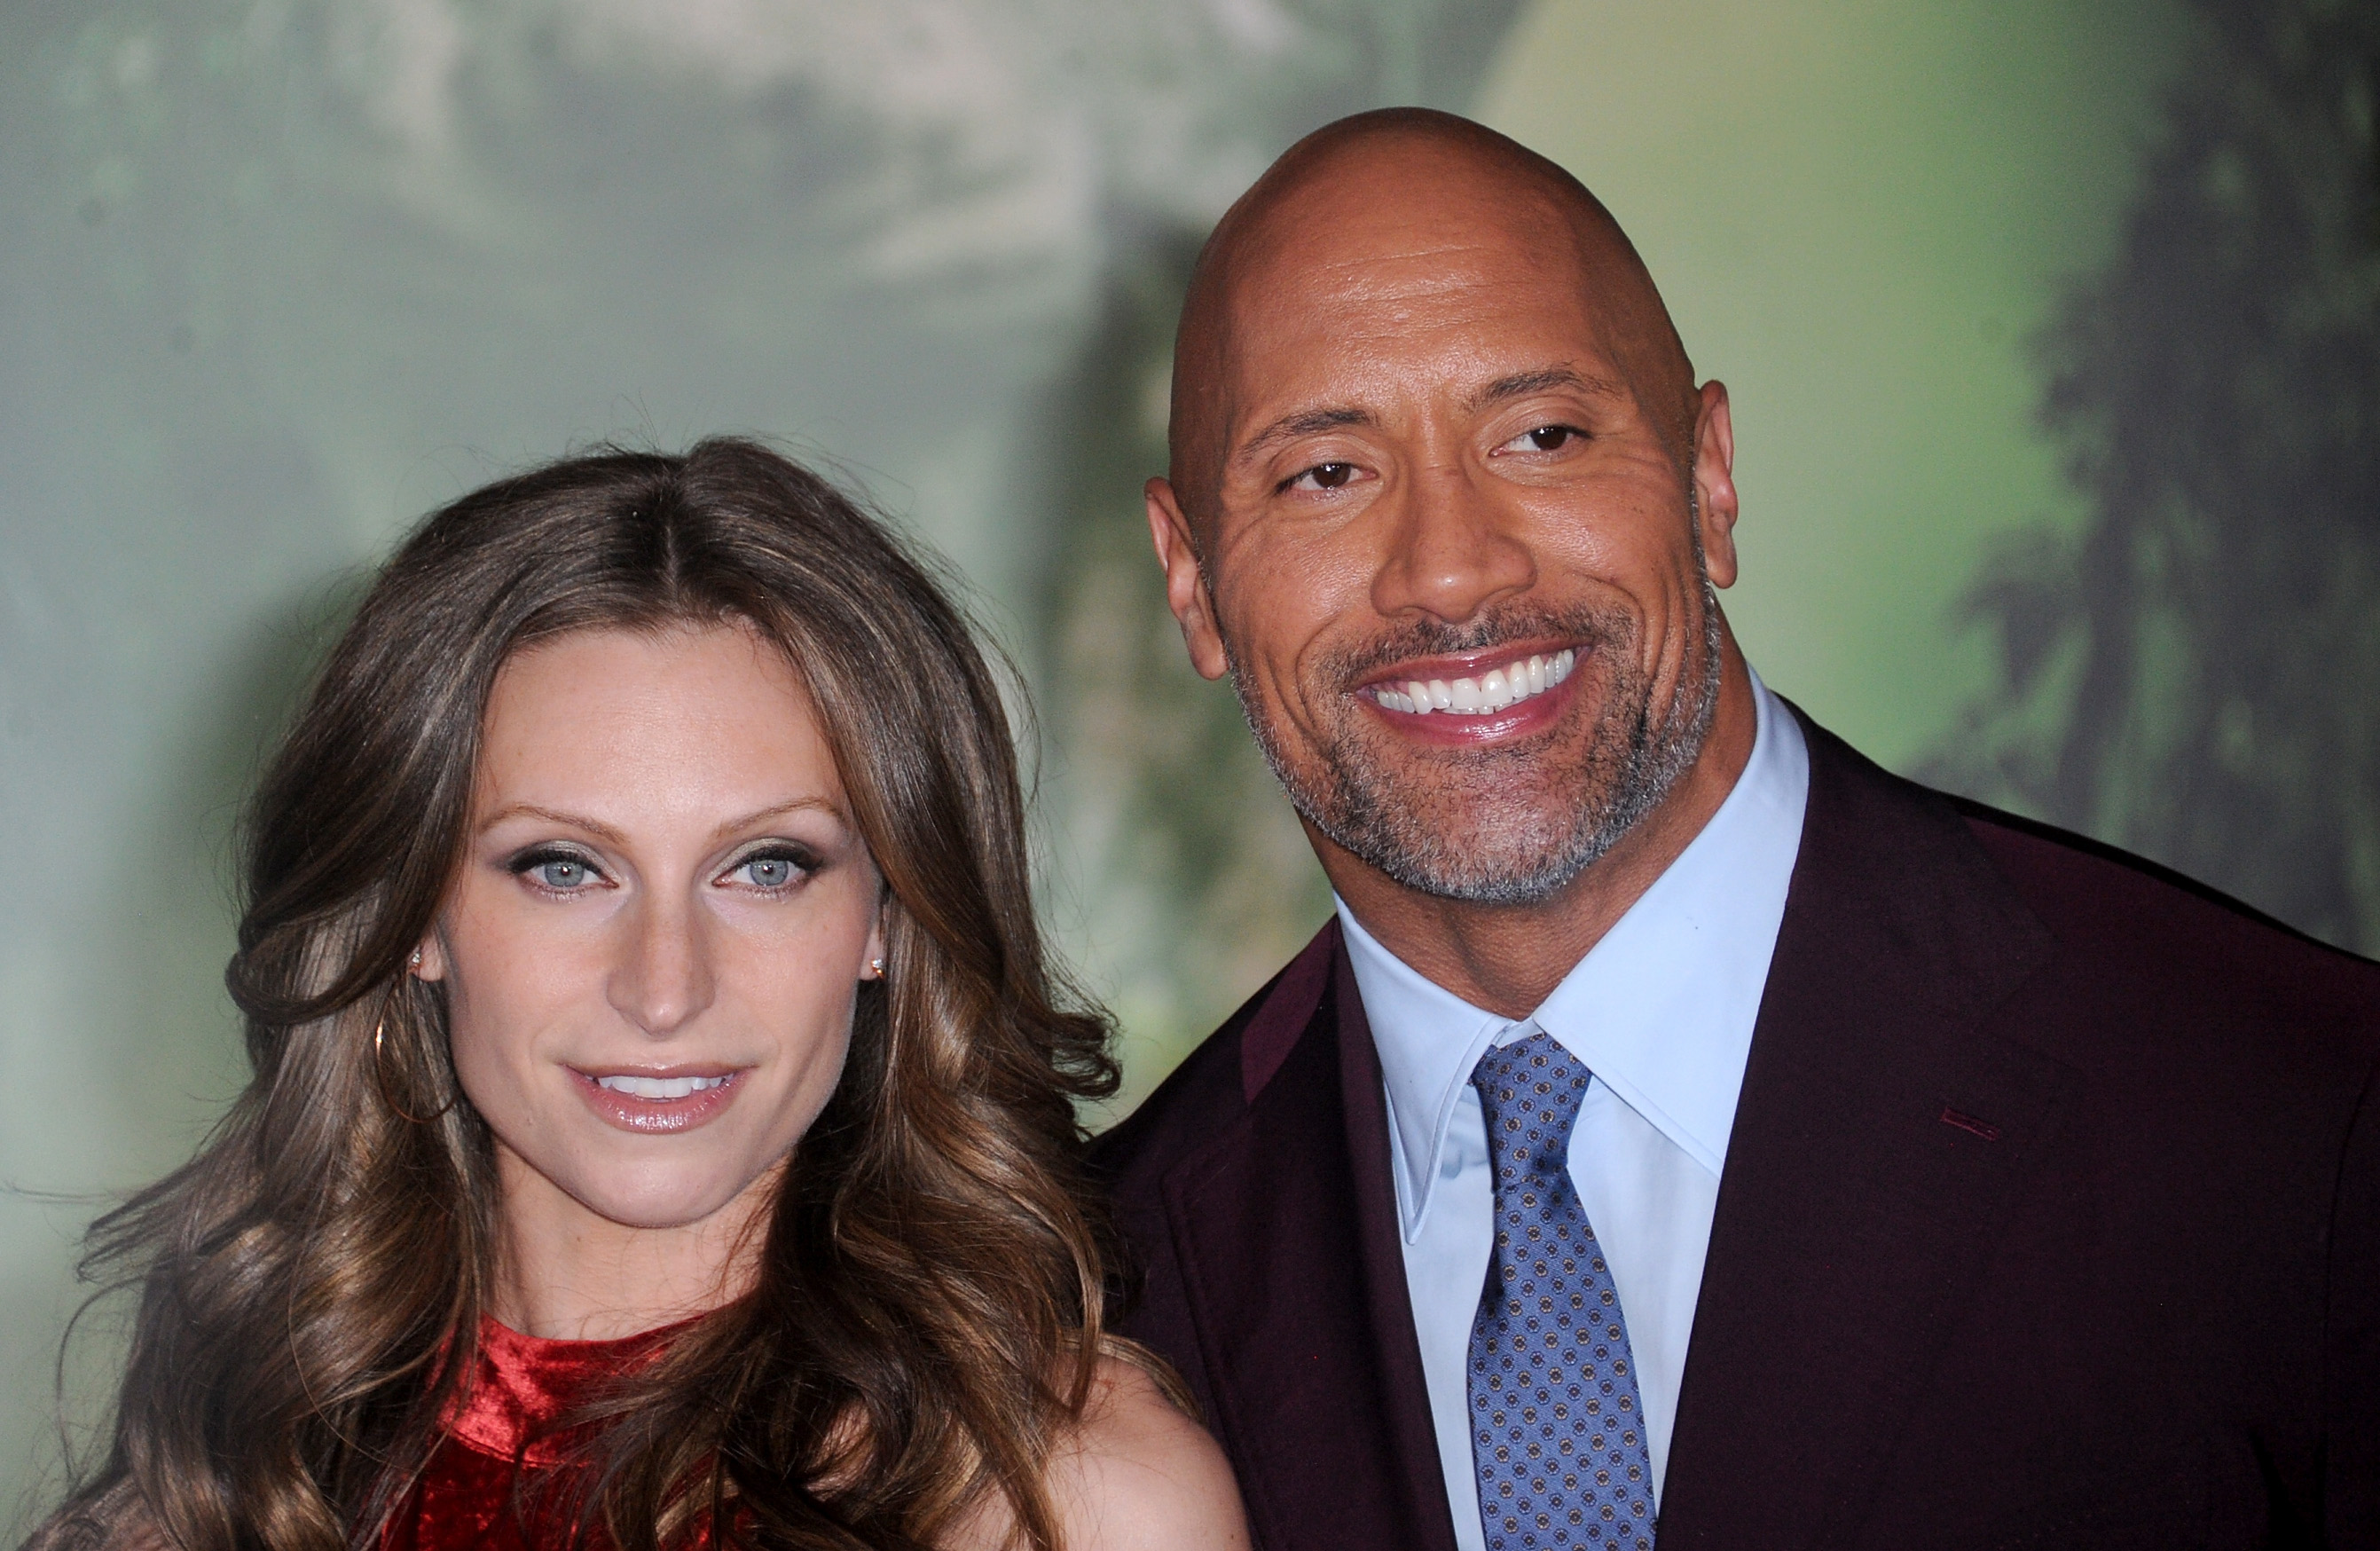 The Rock married - Celeb love news for mid-August 2019